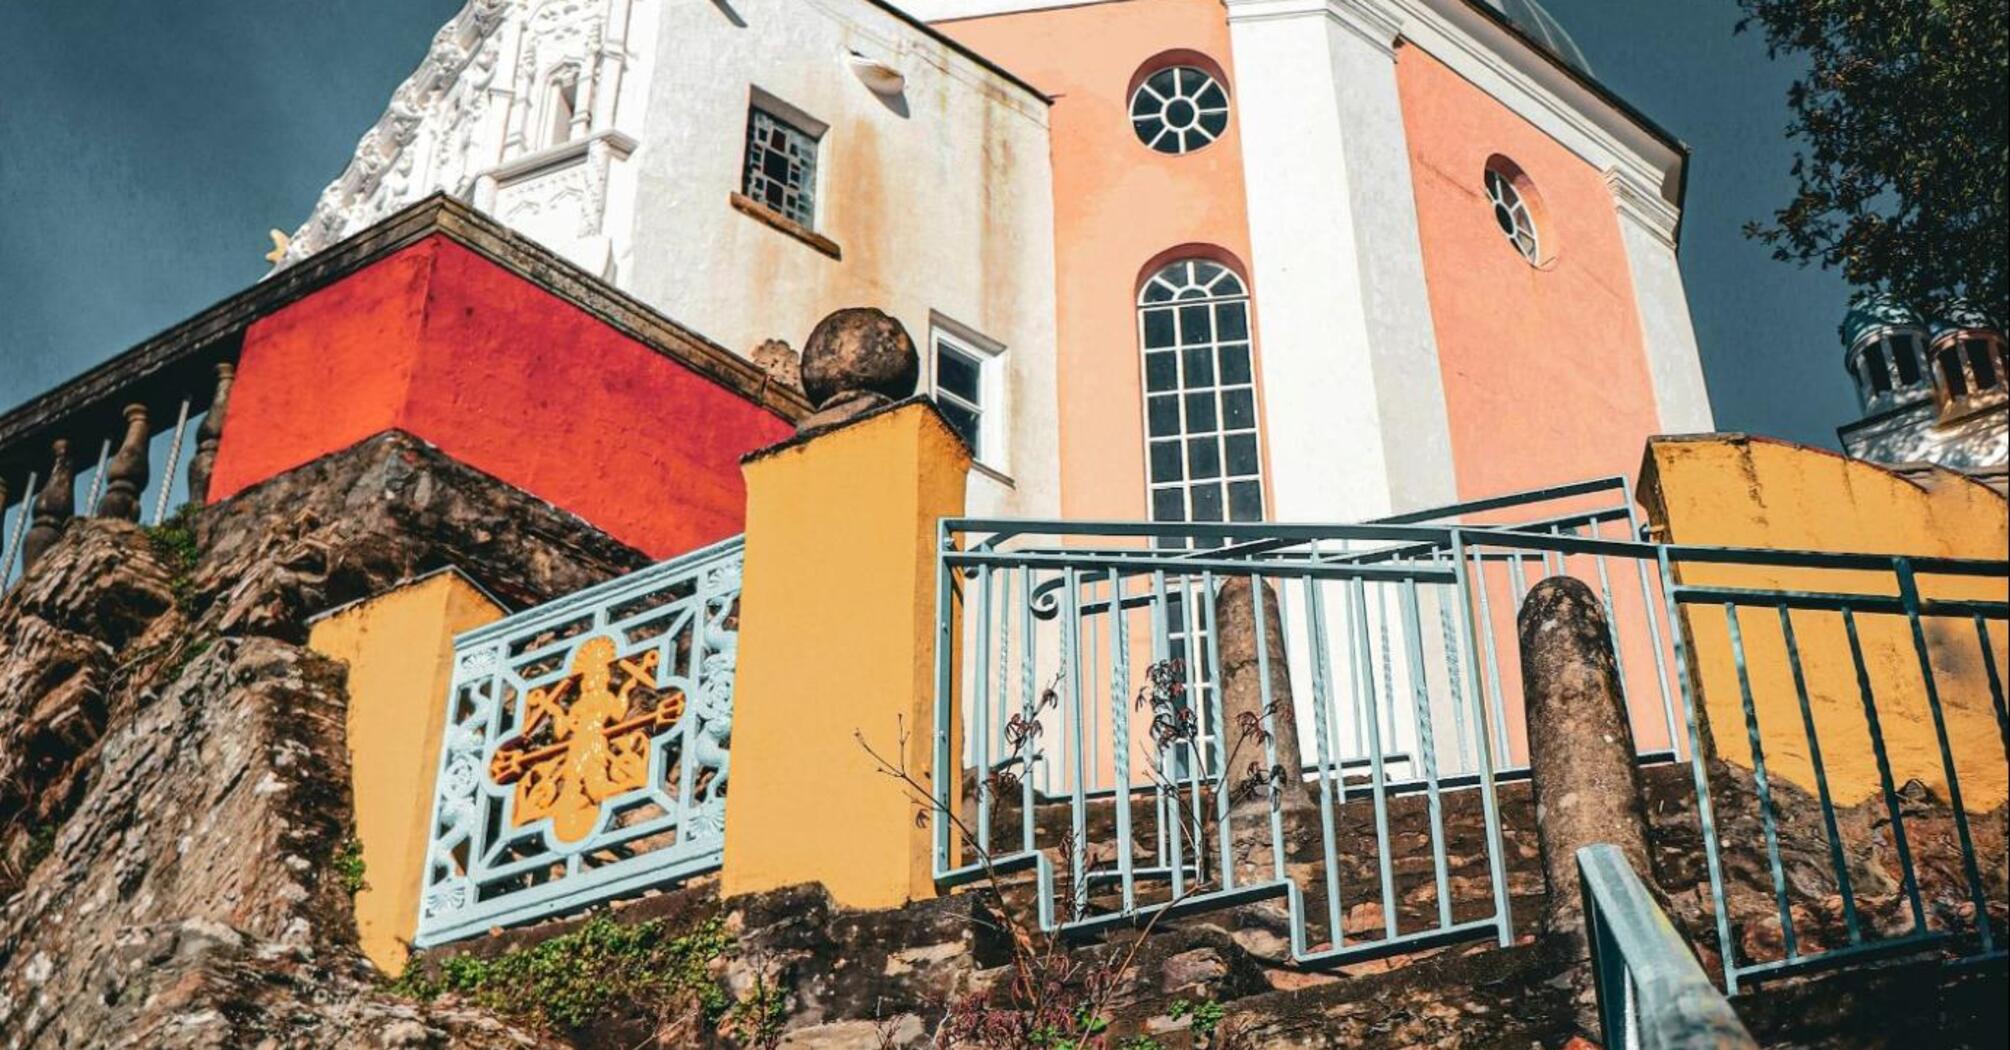 A colorful building with a steeple on top of it in Portmeirion